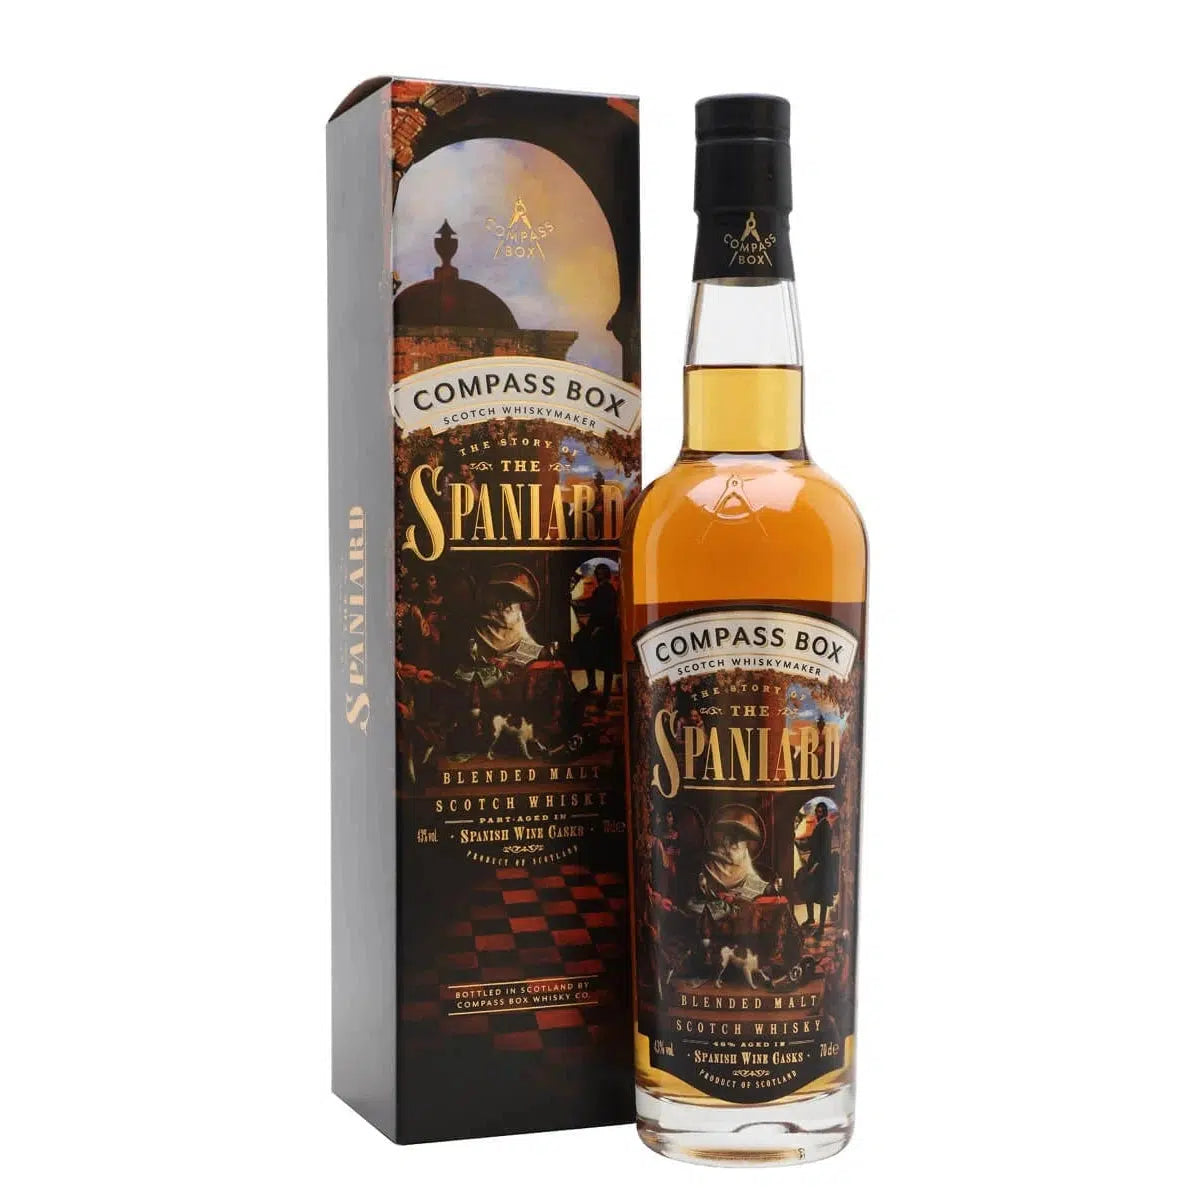 Compass Box The Story of the Spaniard Blended Malt Scotch Whisky 700ml